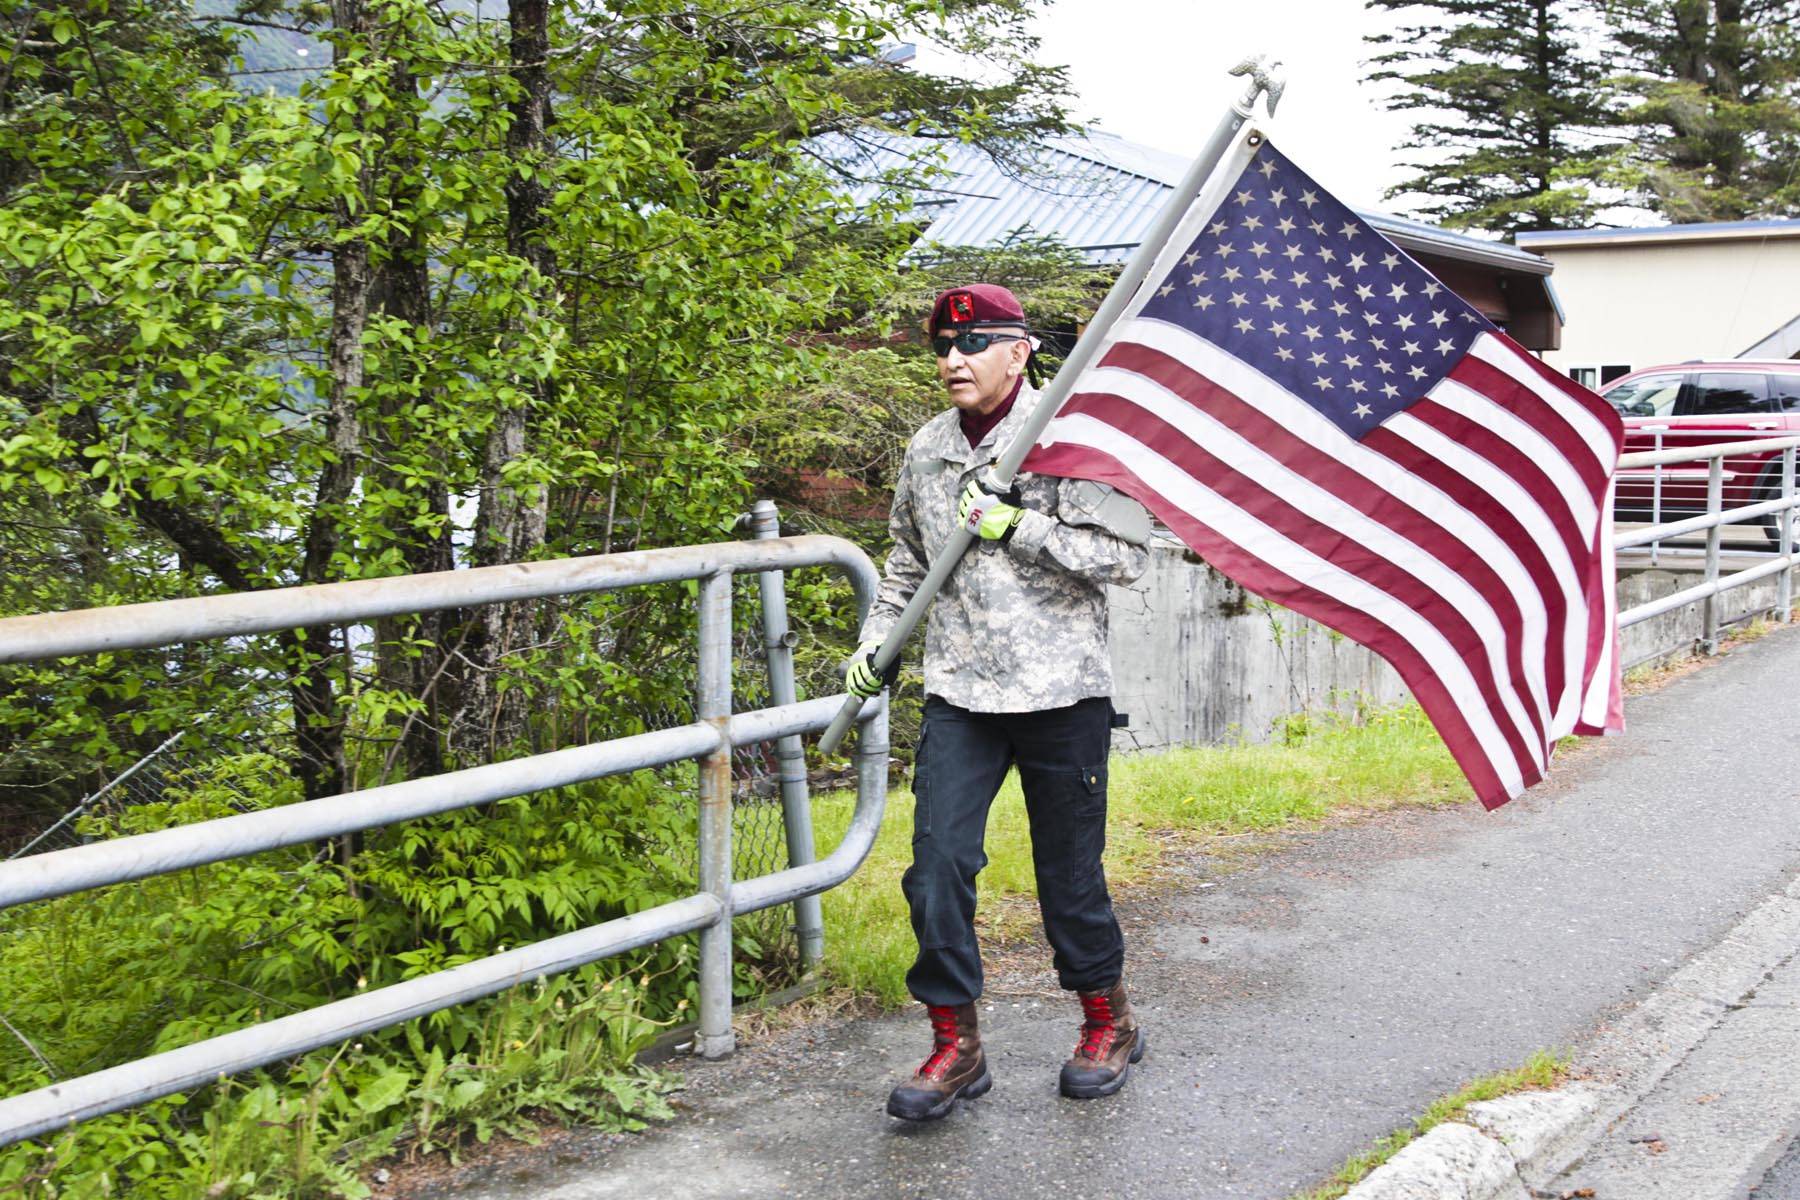 Michael S. Lockett | Juneau Empire                                 Henry Williams runs from Douglas to the Mendenhall Valley on Memorial Day to honor dead service members, including his relative, Air Force Tech Sgt. Leslie Dominic Williams, who died in Afghanistan in 2011.